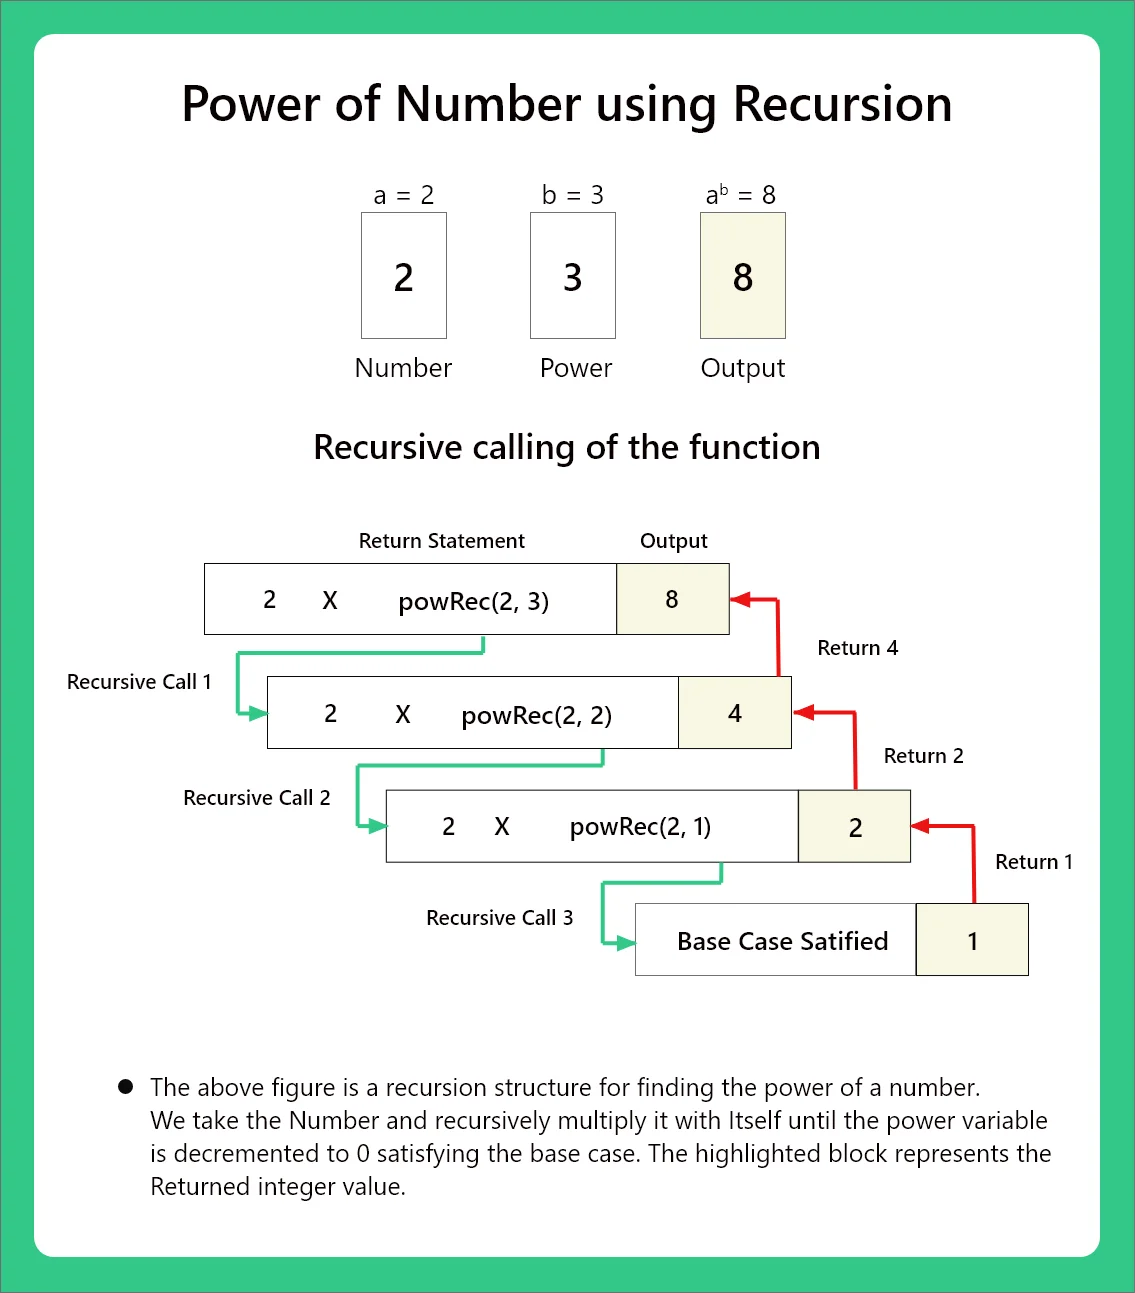 Power of a Number Using Recursion in C